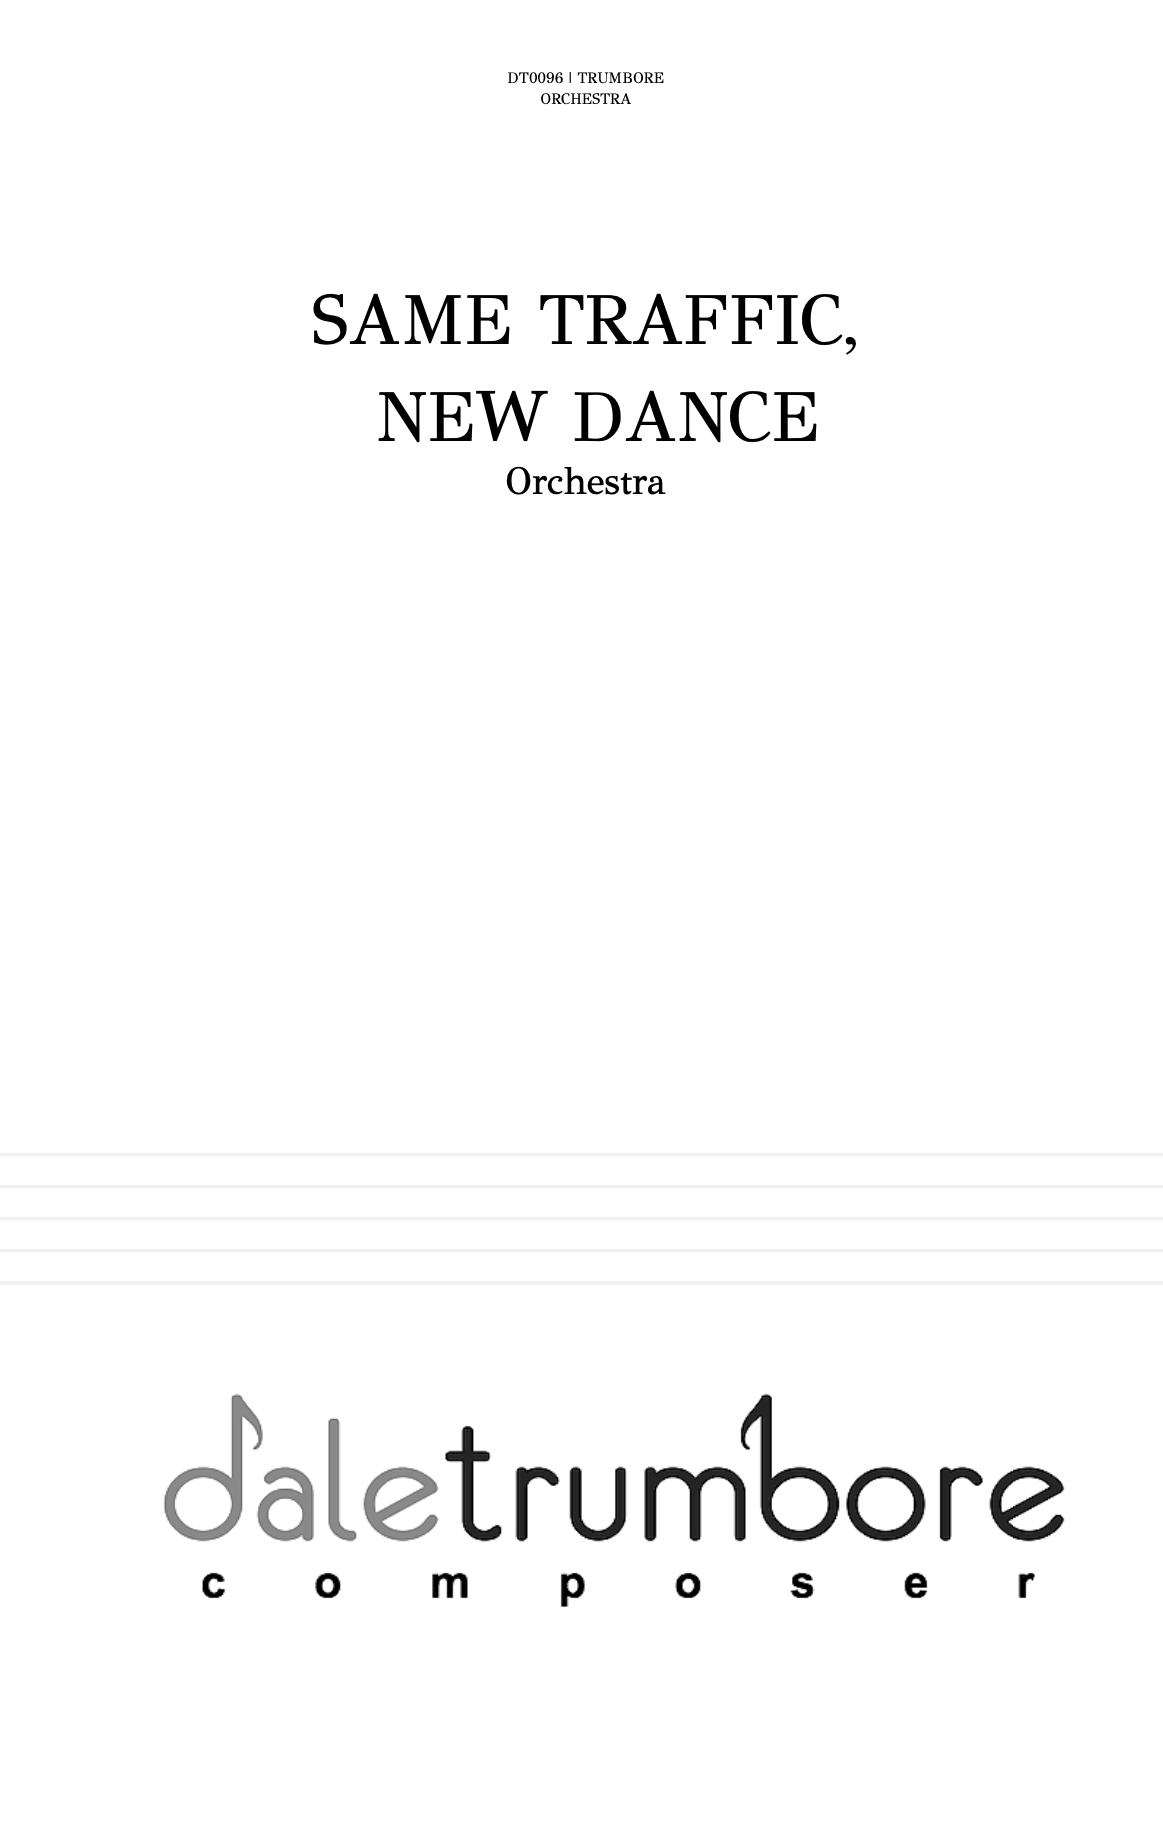 Same Traffic, New Dance by Dale Trumbore